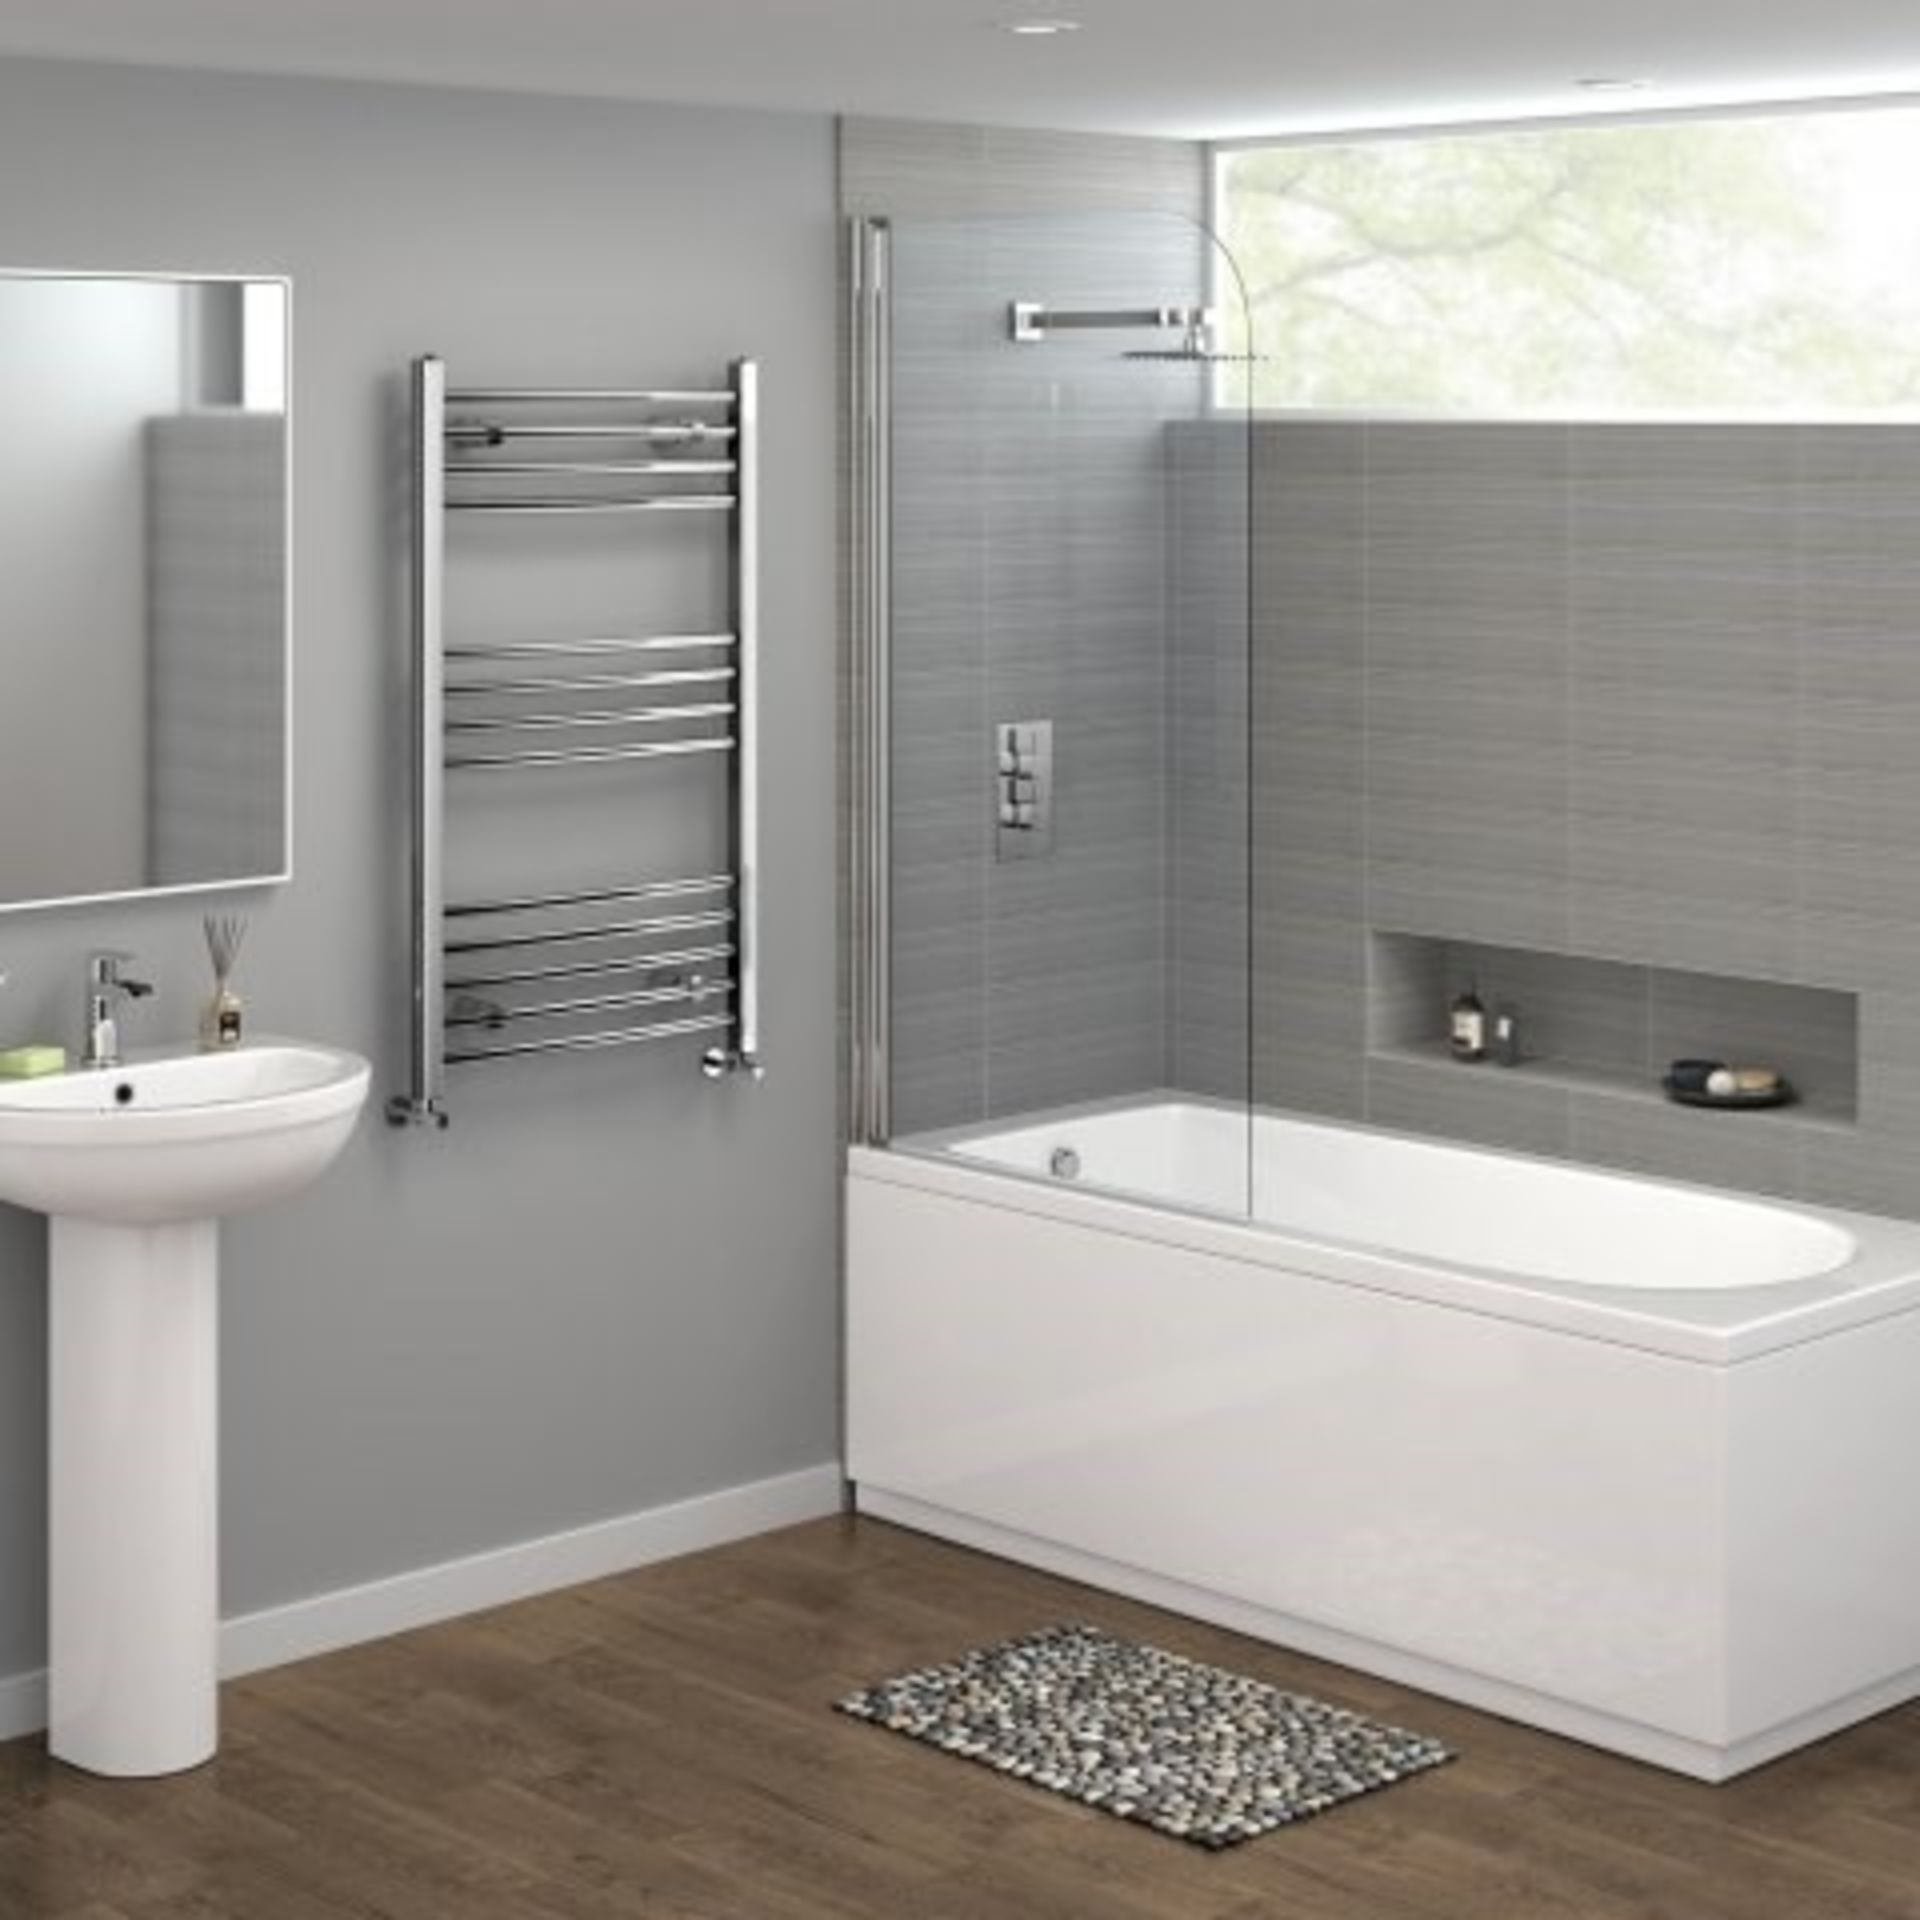 NEW & BOXED 1200x600mm - 20mm Tubes - RRP £219.99.Chrome Curved Rail Ladder Towel Radiator. O... - Image 2 of 2